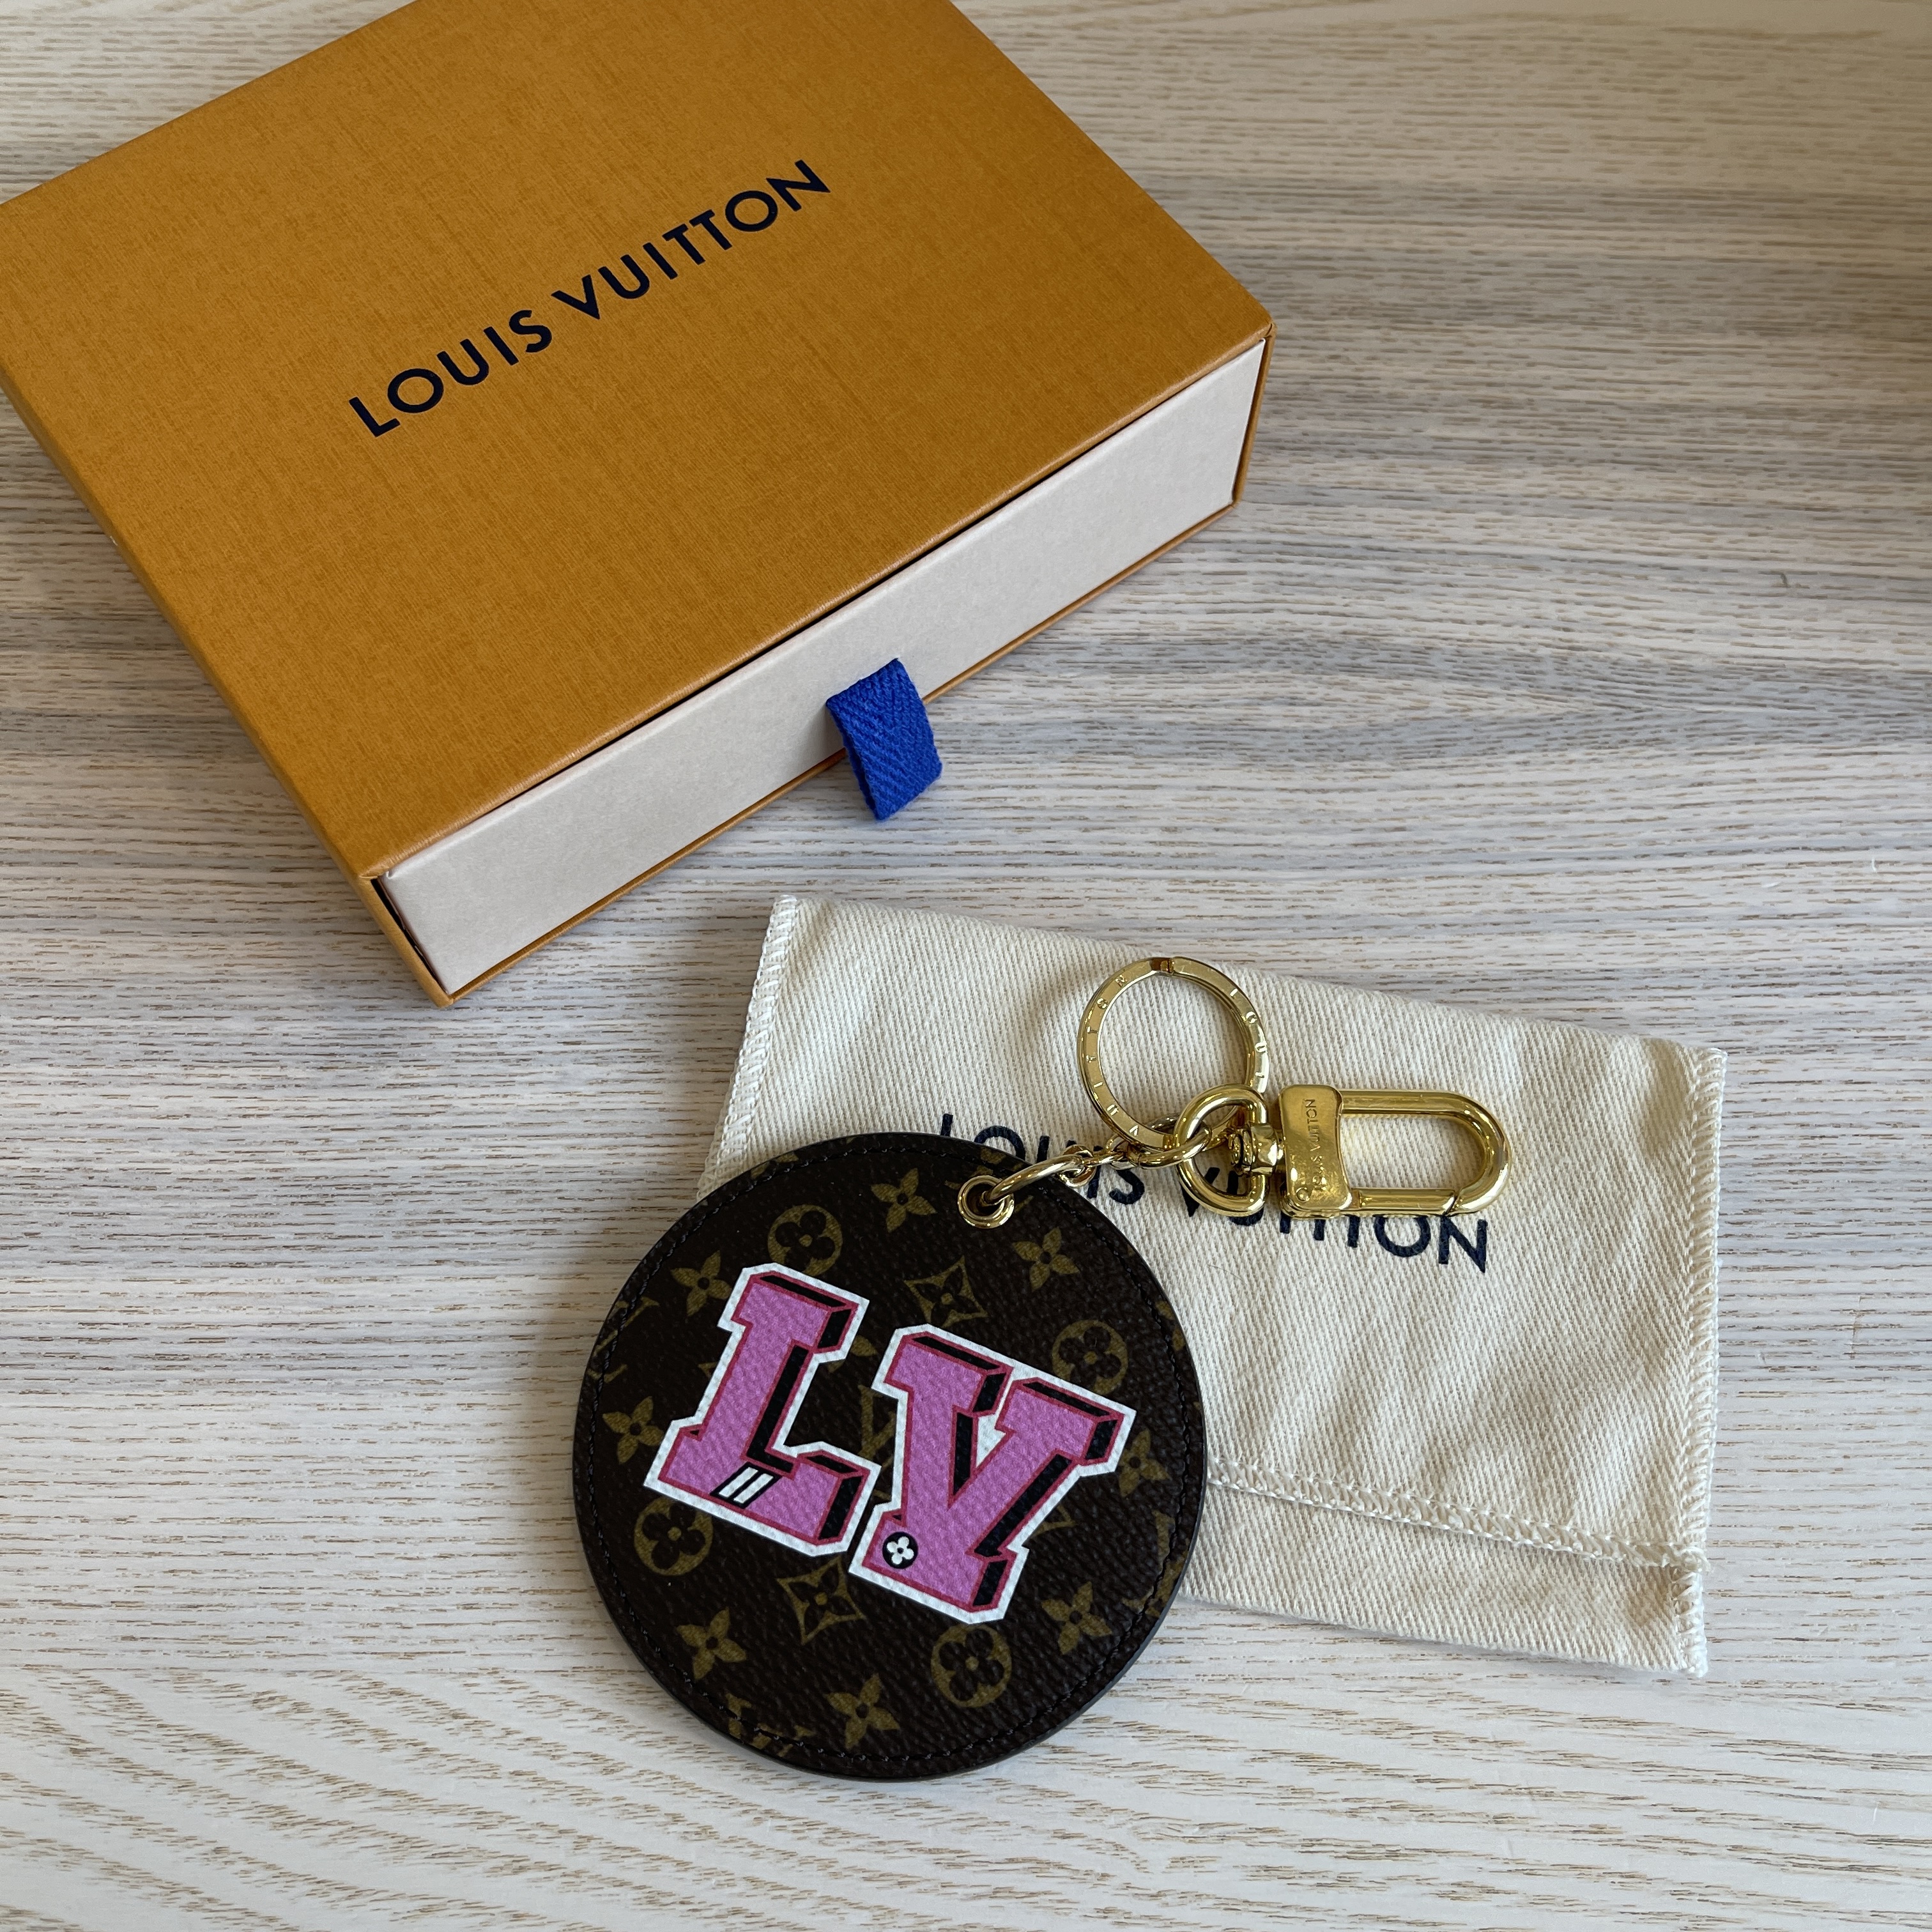 Louis Vuitton bag charm/ key holder LV Stories collection limited